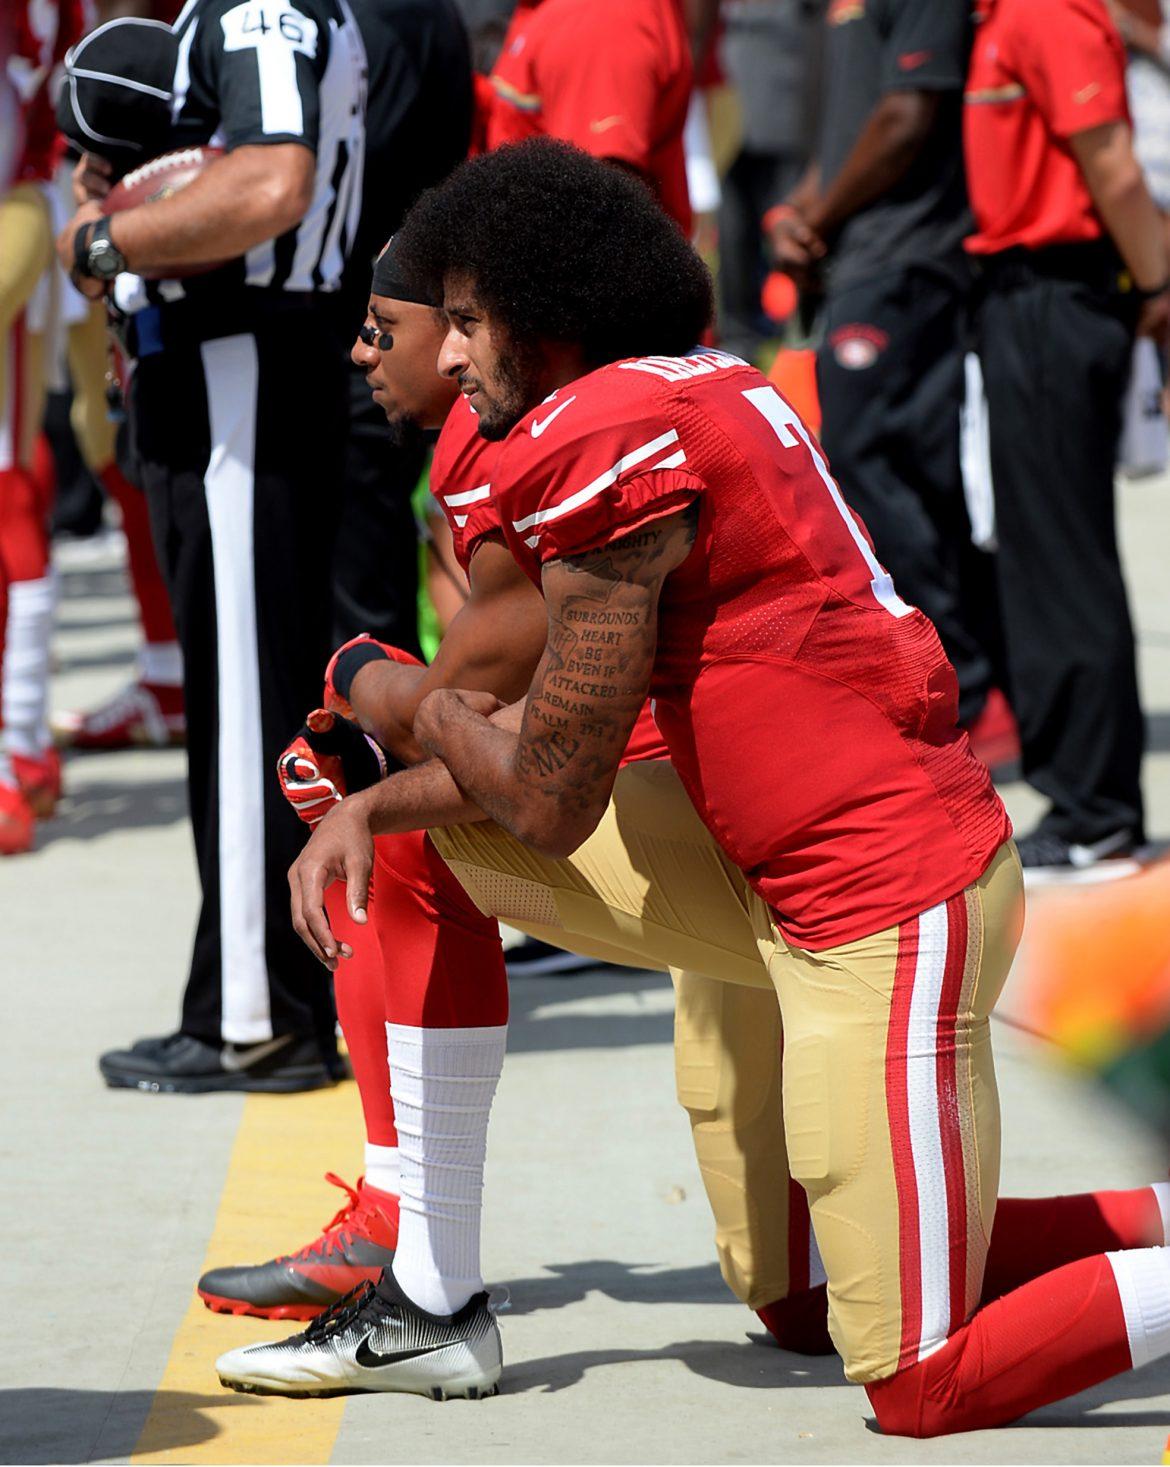 professional football player in red and gold uniform kneeling